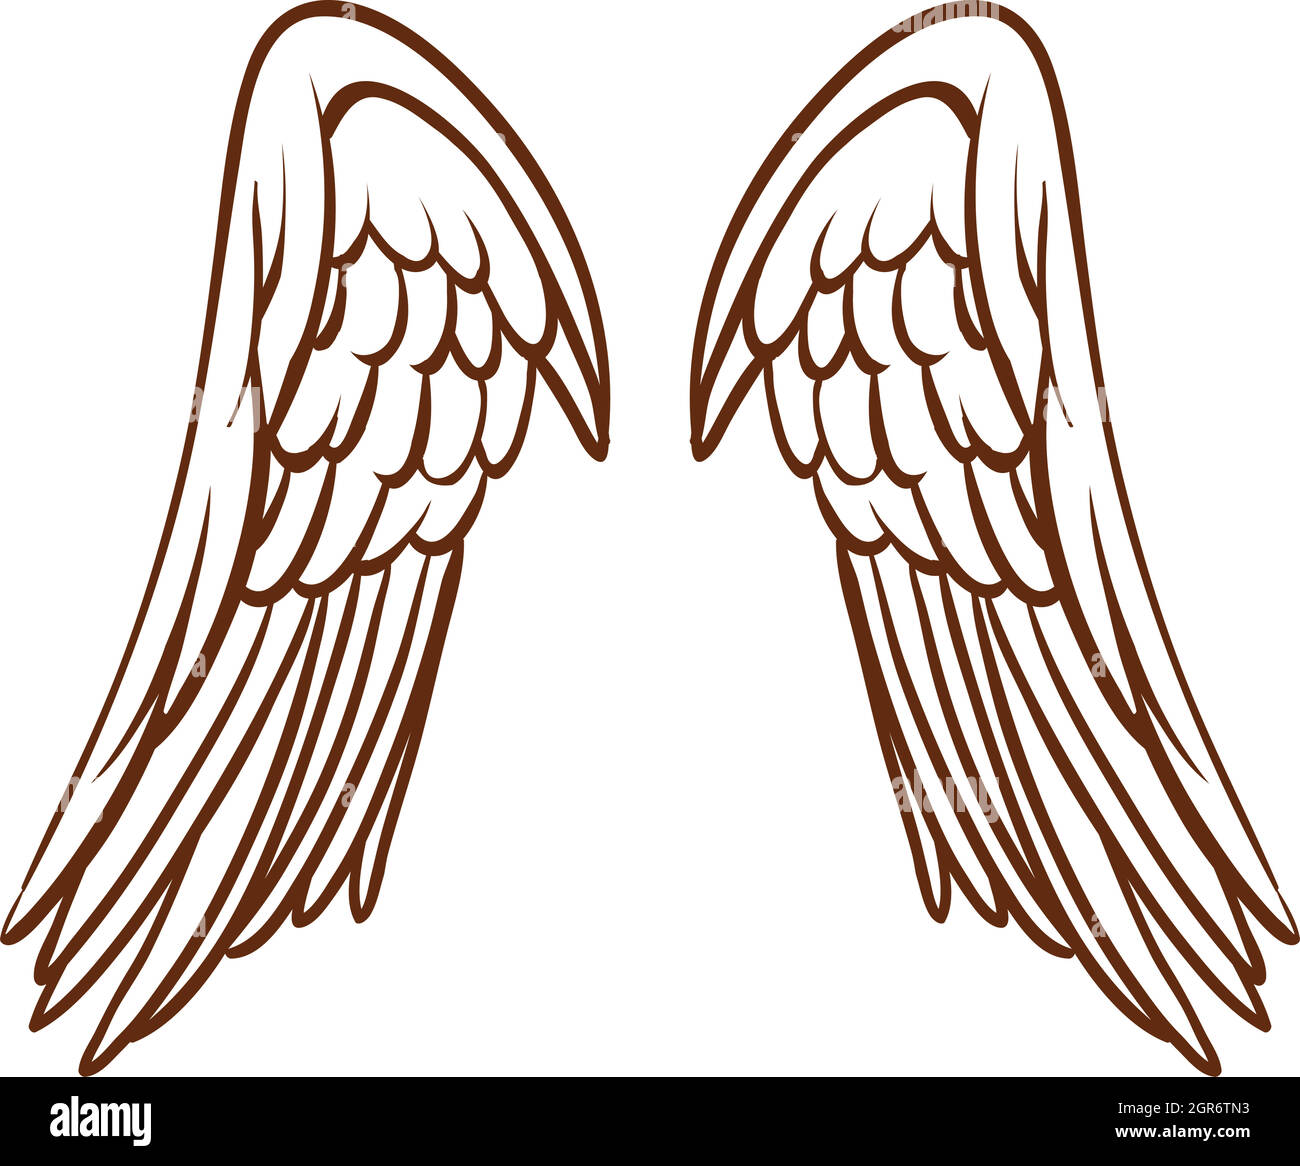 how to draw angel wings step by step